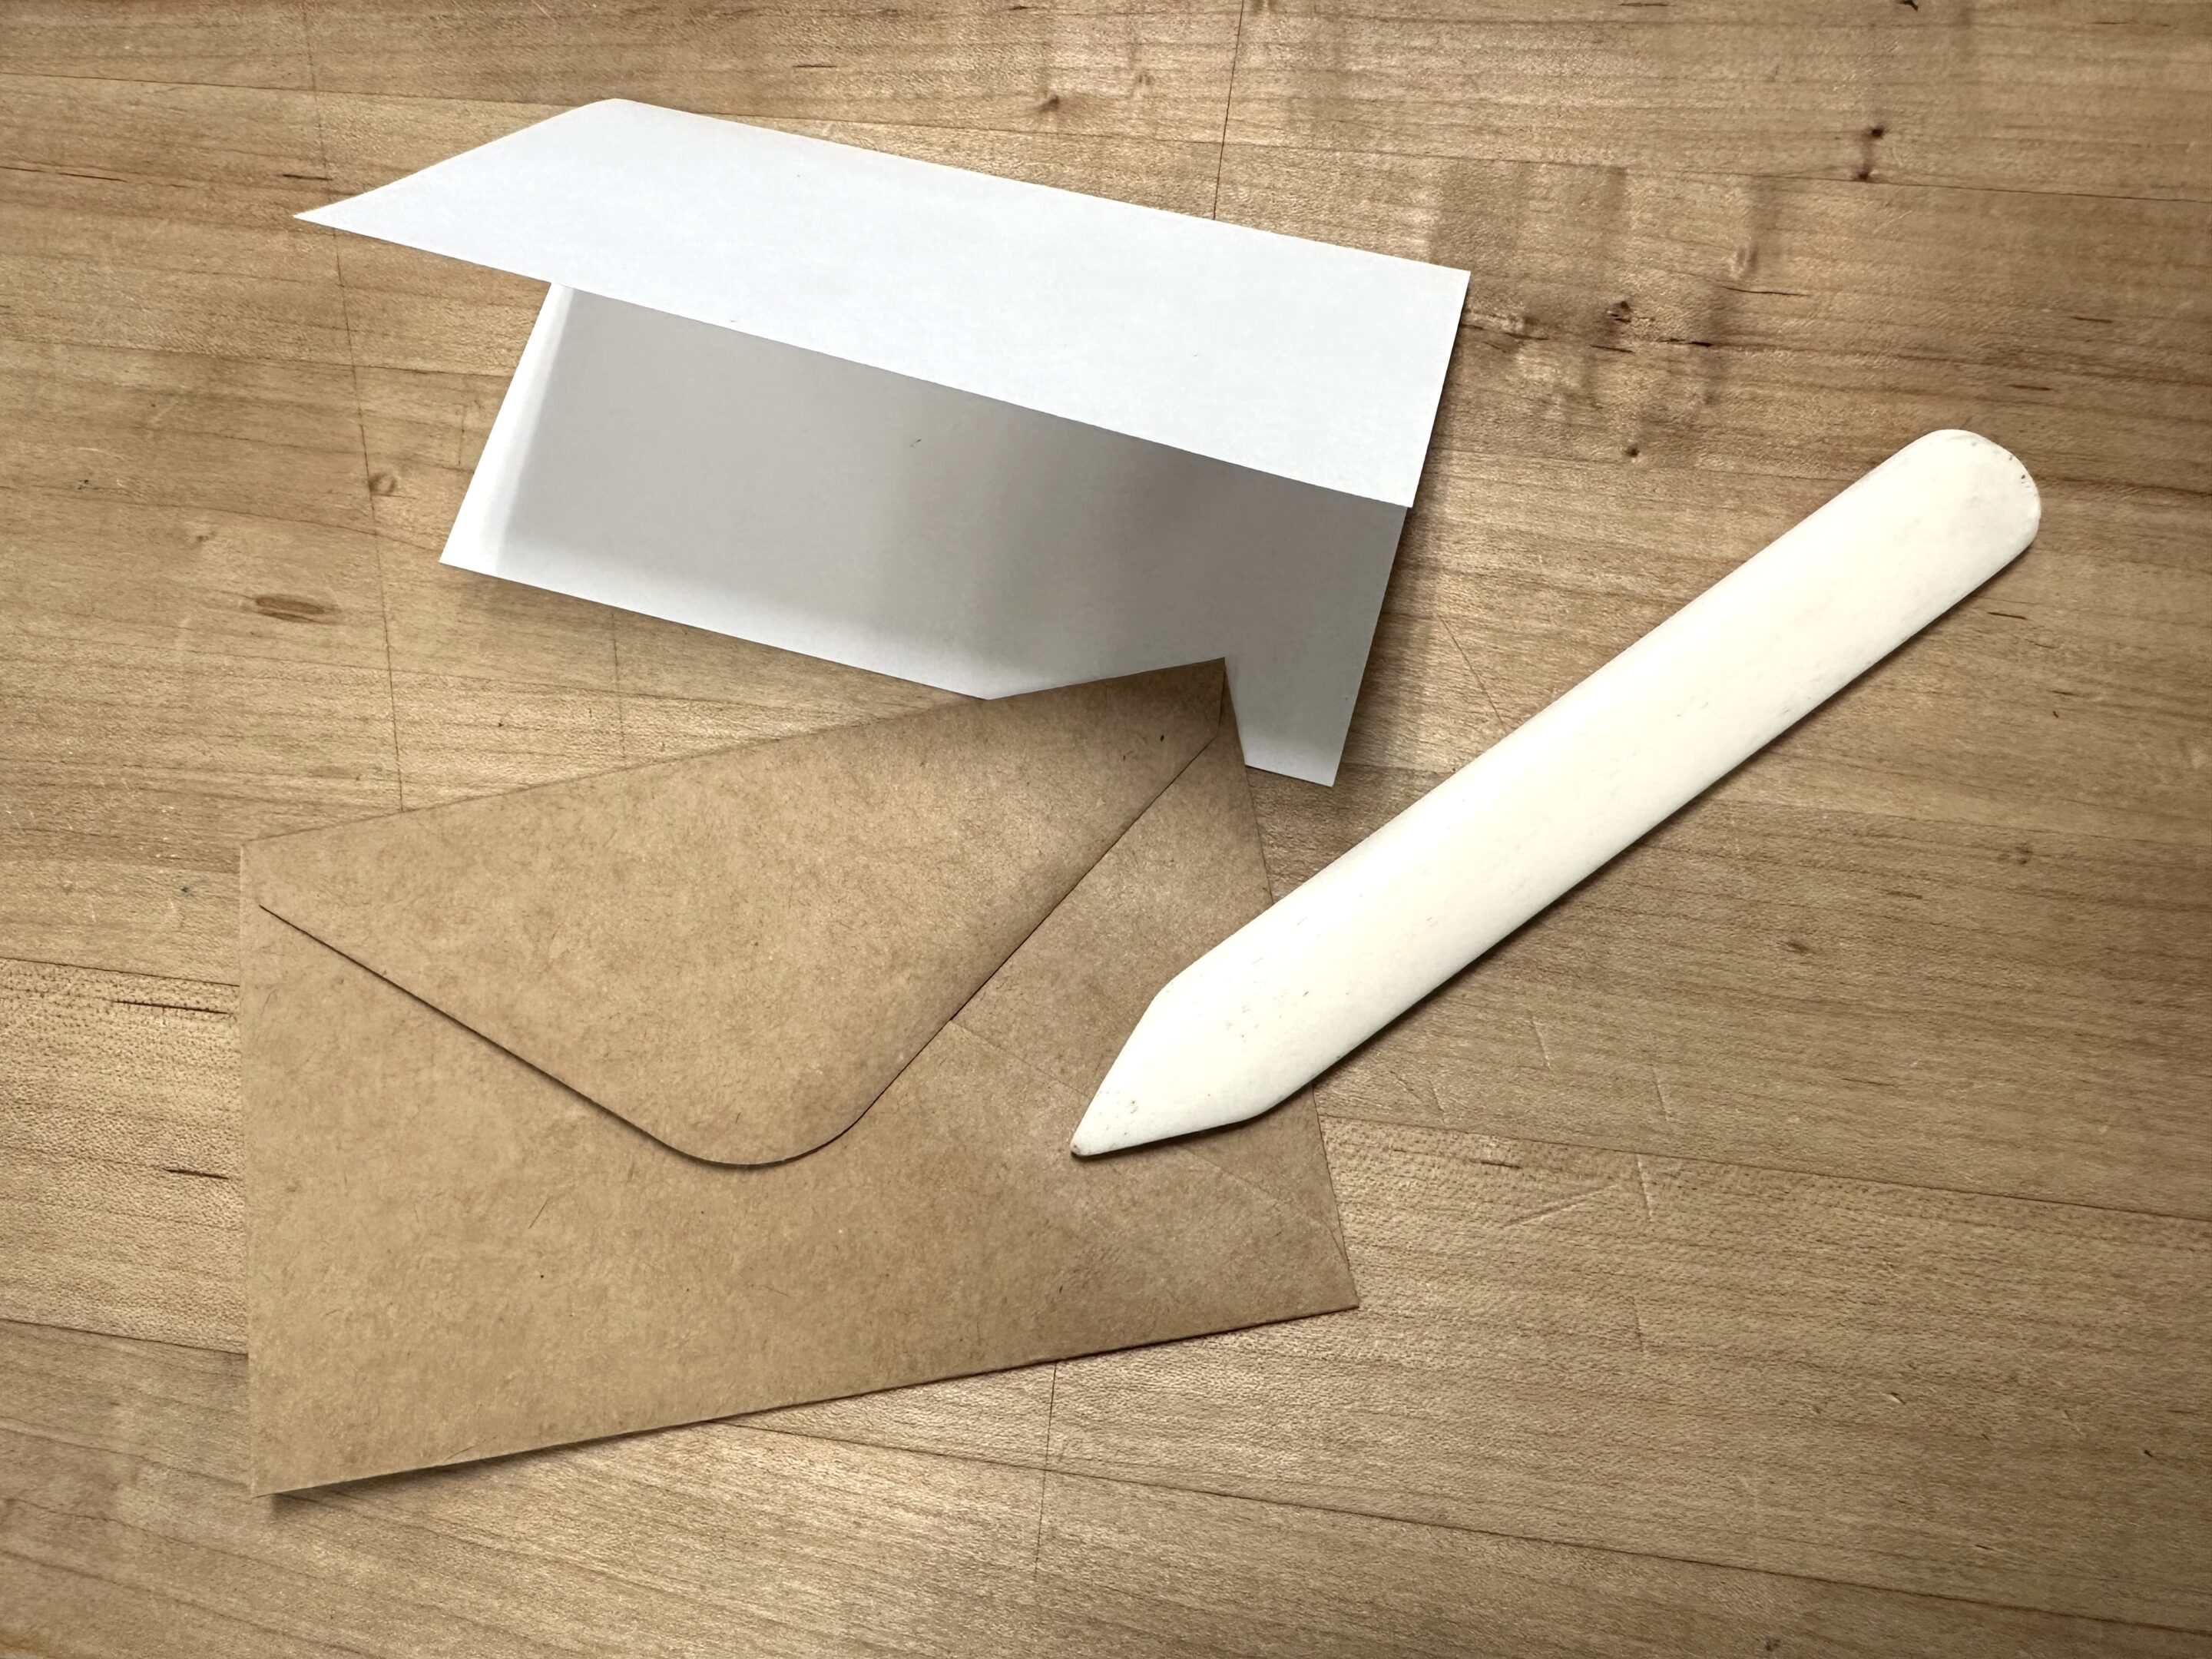 A notecard, brown envelope and paper folder.